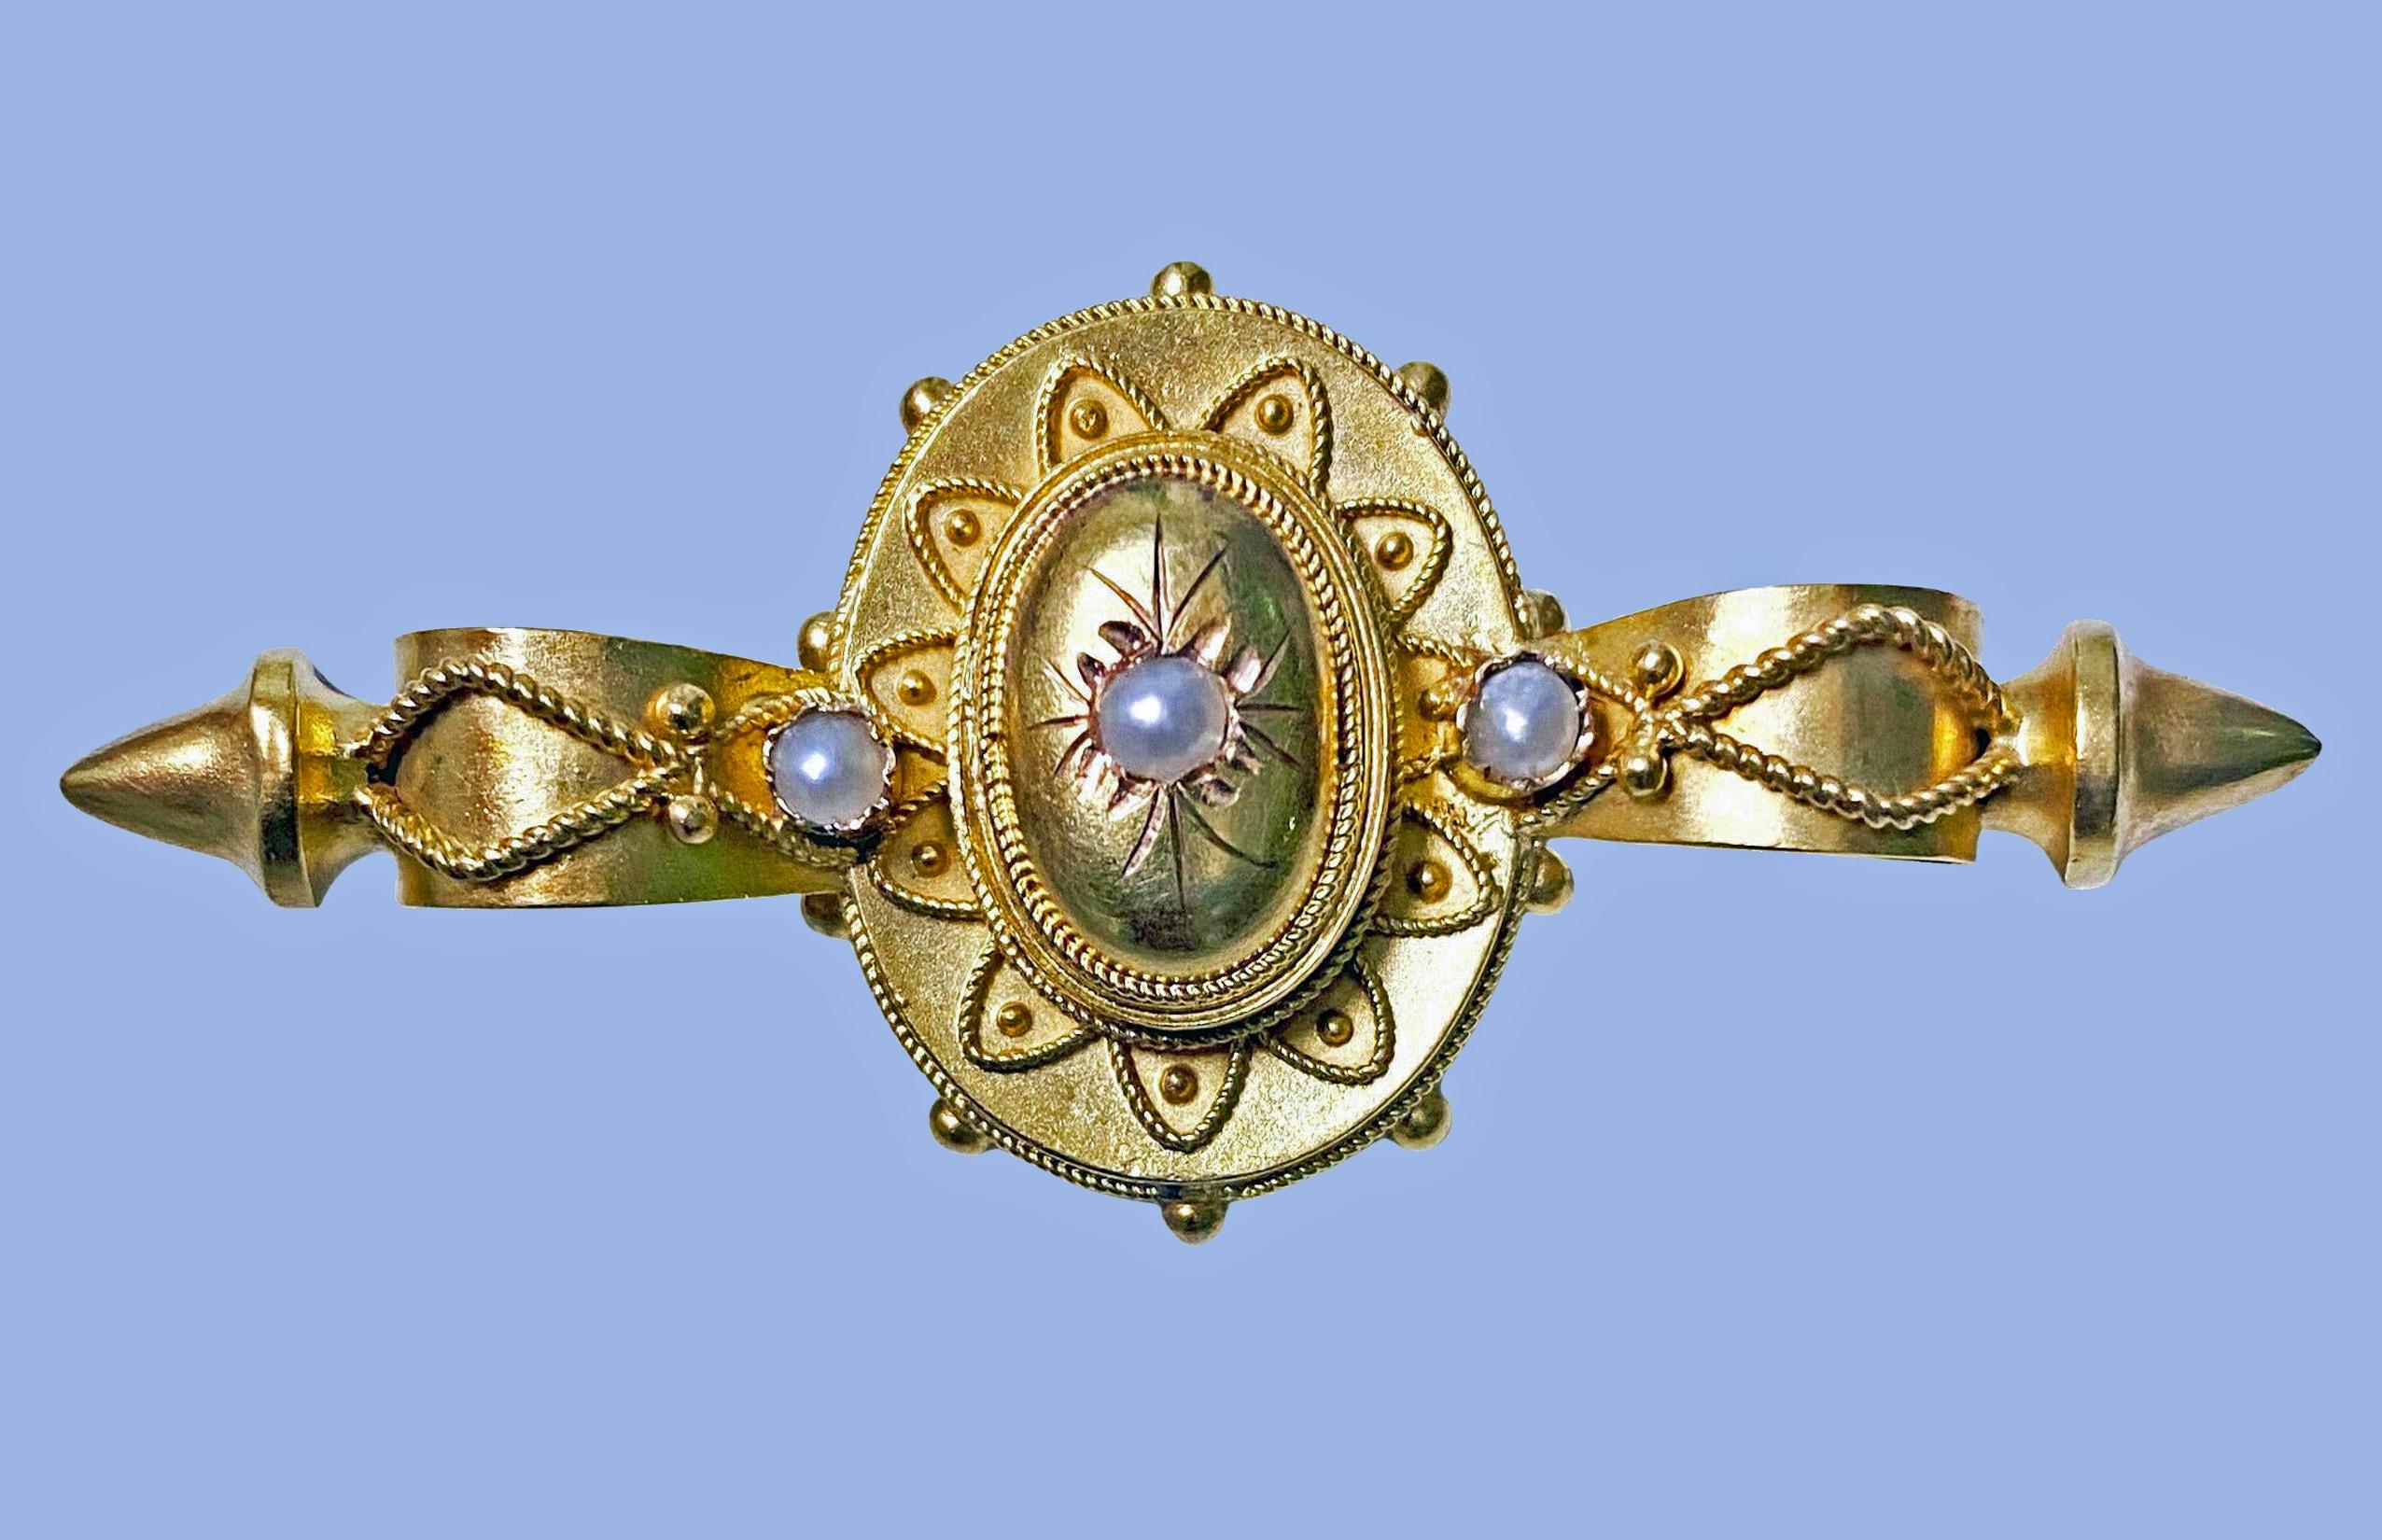 Antique 19th century 15K pearl Etruscan pin brooch, English C.1875. The brooch set with three small pearls with etruscan surround decoration, acid matte finish gold, vacant locket to reverse. Acid tested for 15K. Measures: 2.00 x 0.75 inches. Item